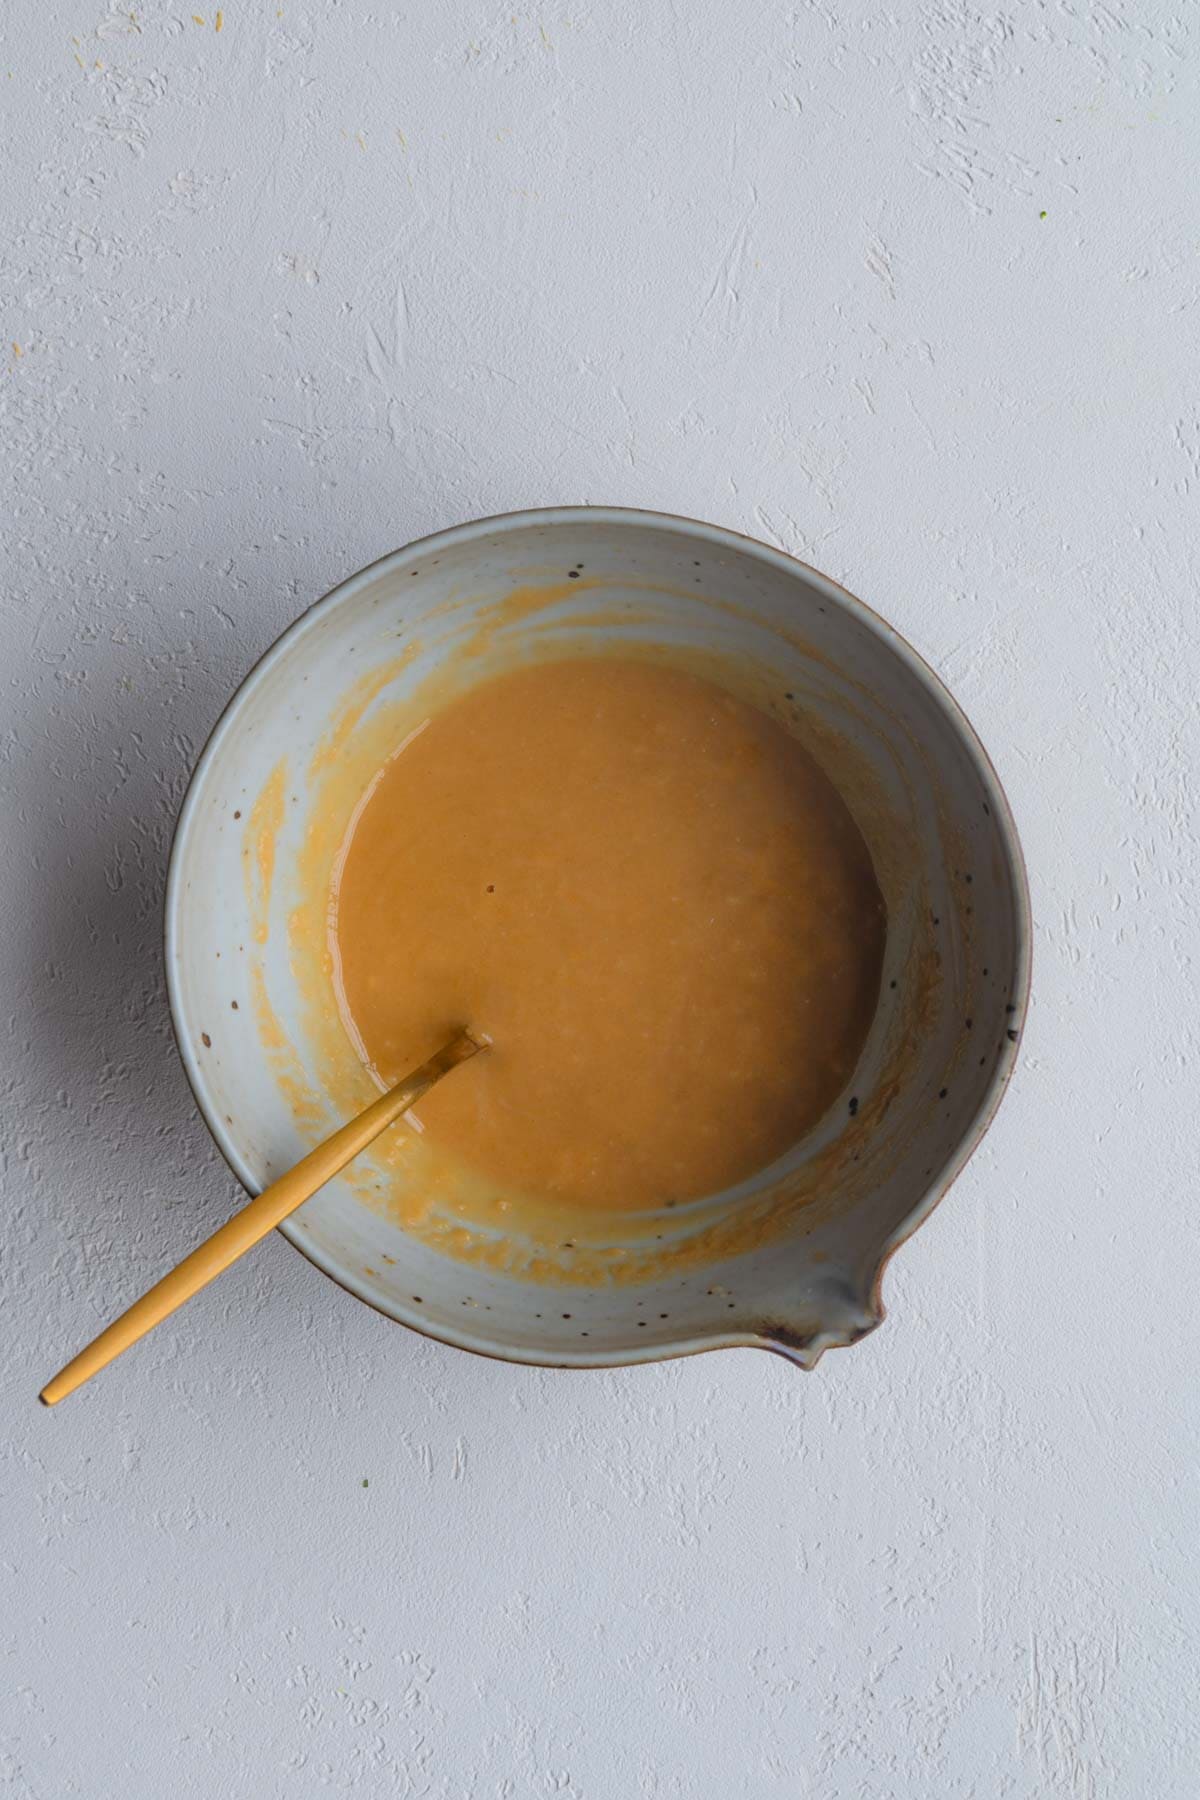 An orange colored dressing in a pourable bowl with a gold spoon.